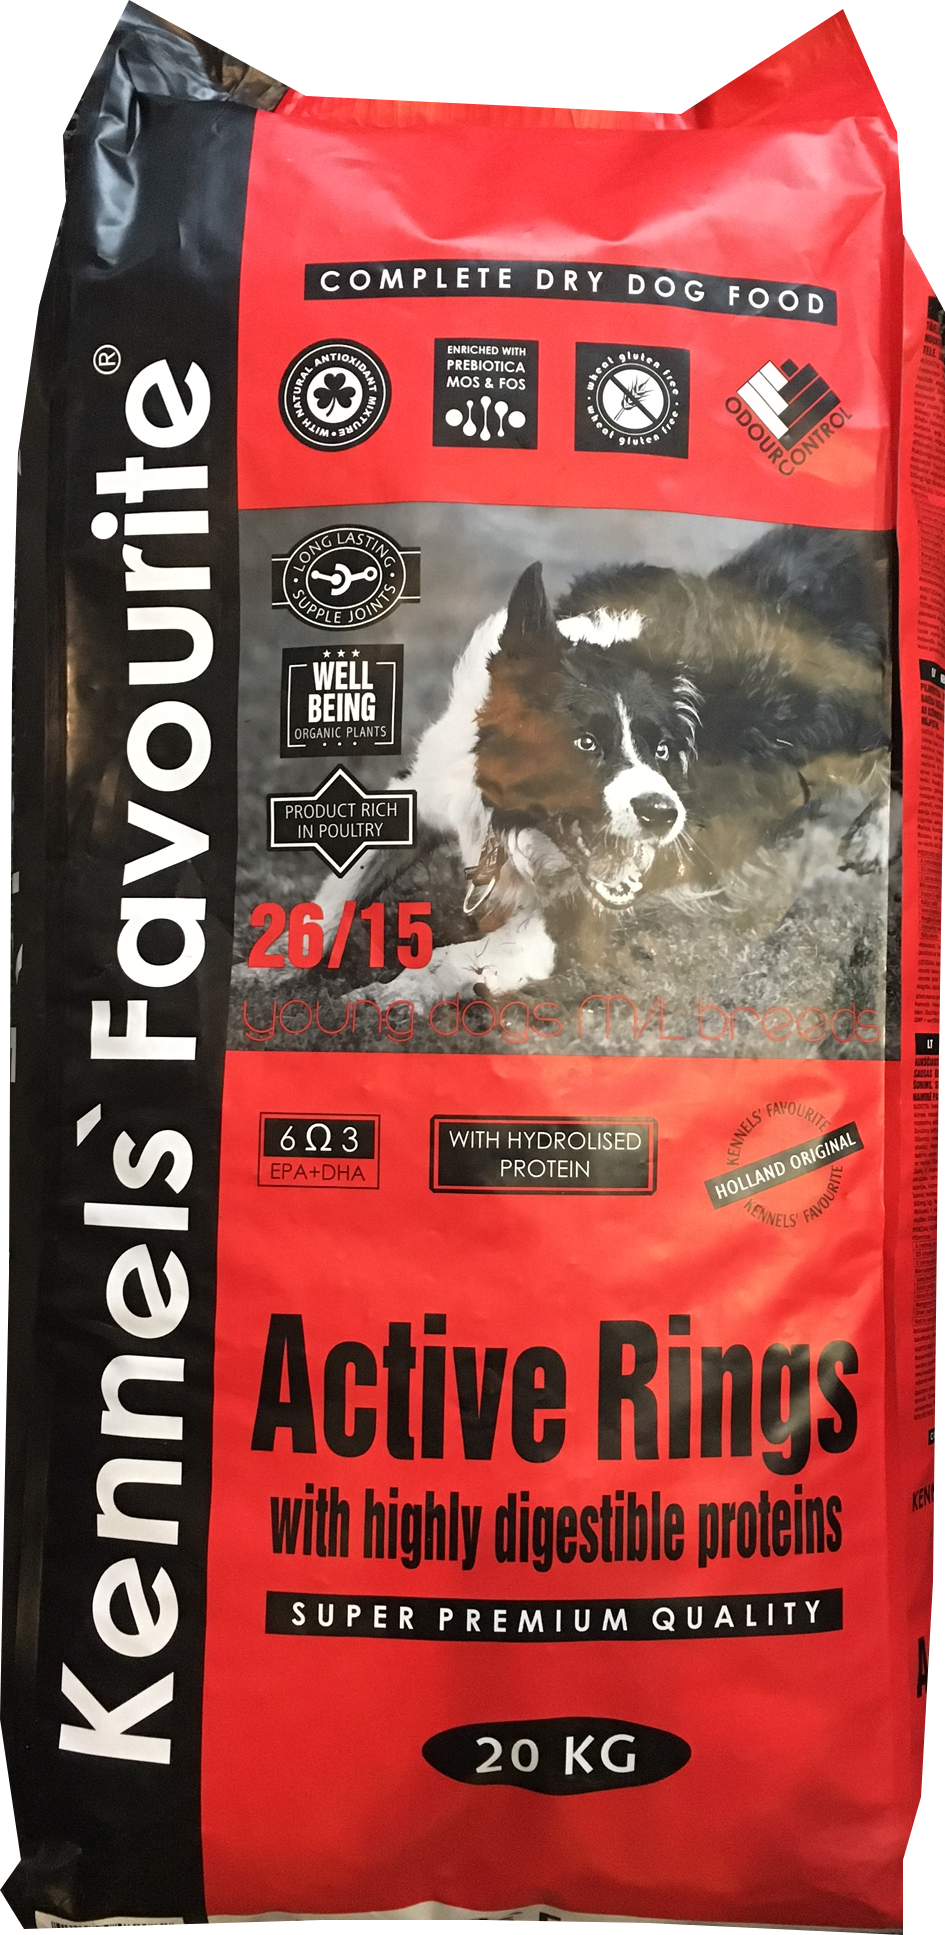 KENNELS FAVOURITE ACTIVE RINGS 20 Kg